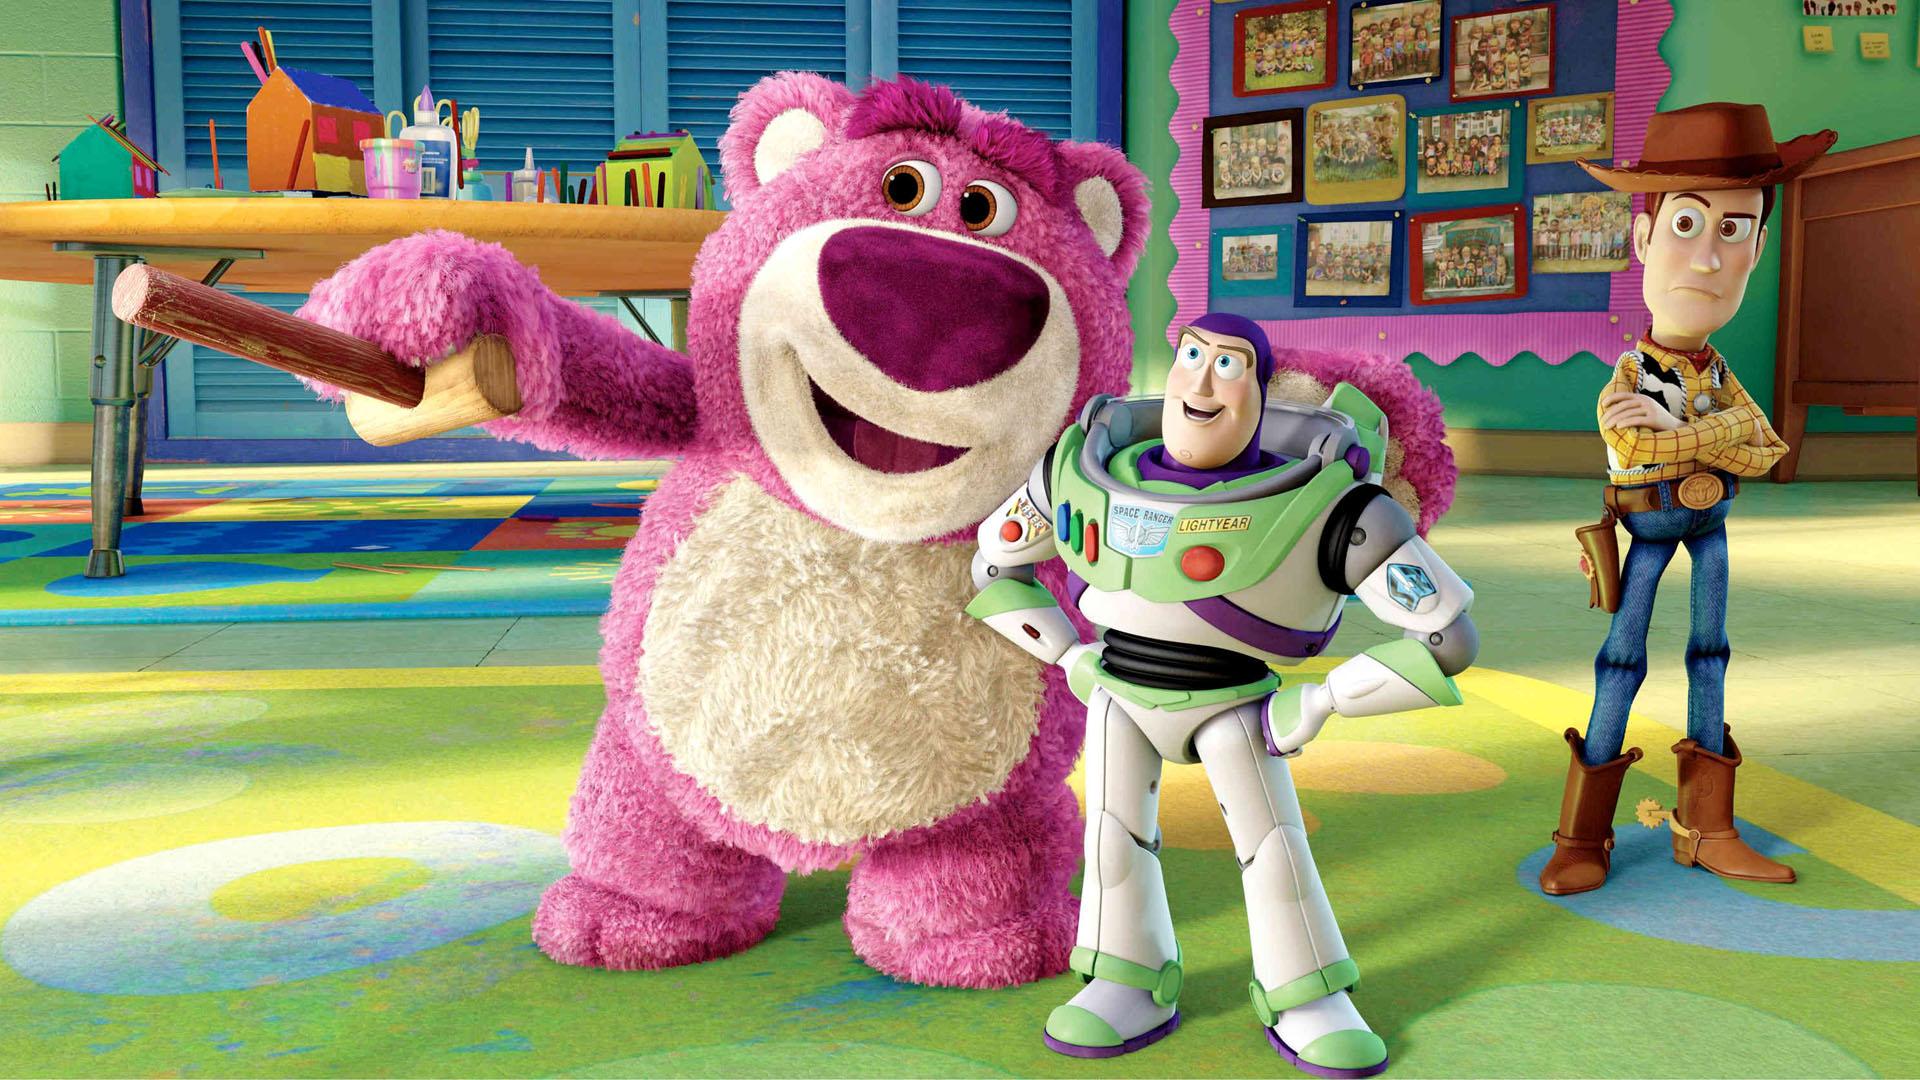 Toy Story 1920x1080 Wallpaper, 1920x1080 Wallpaper & Picture